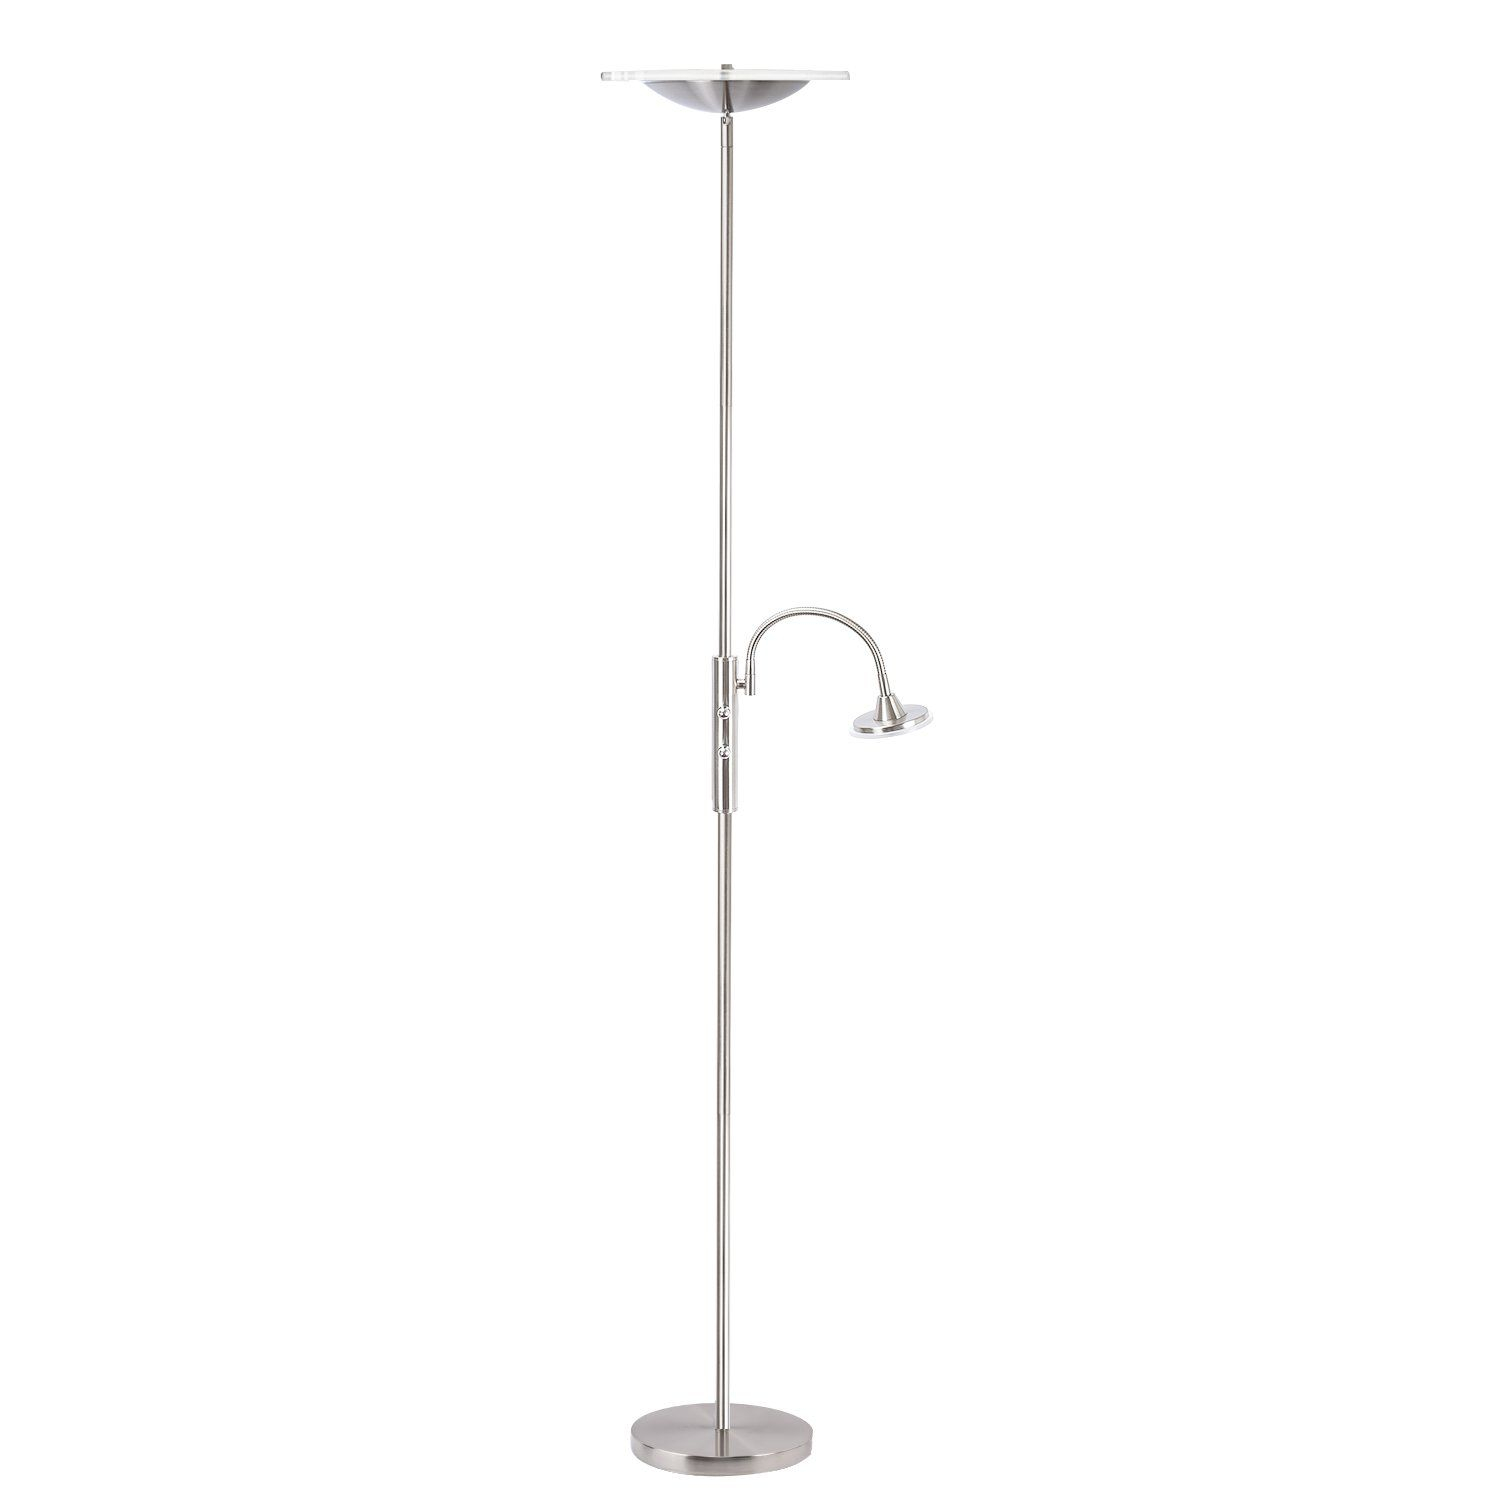 Floor Lampssunllipe Led Torchiere Floor Lamp With Reading intended for sizing 1500 X 1500